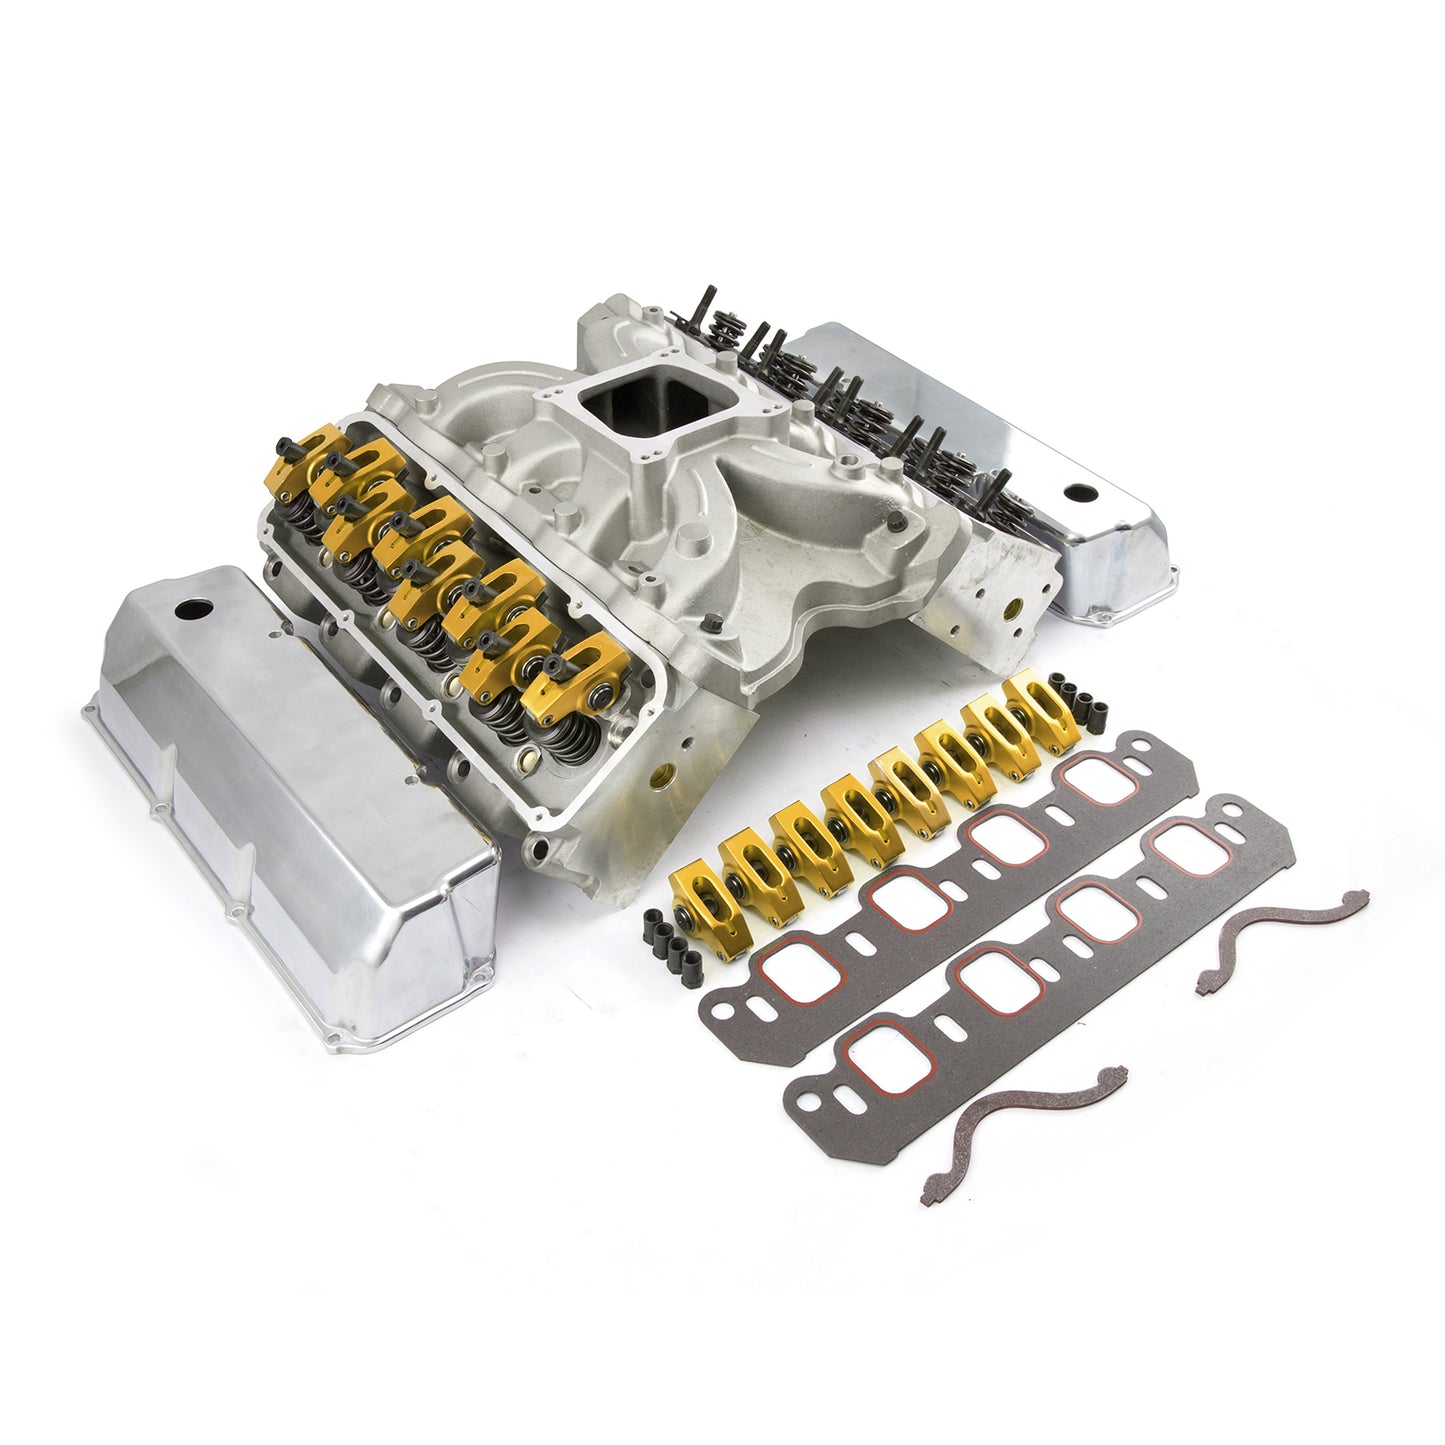 Speedmaster PCE435.1040 Fits Ford 302 351C Cleveland Hyd FT Cylinder Head Top End Engine Combo Kit